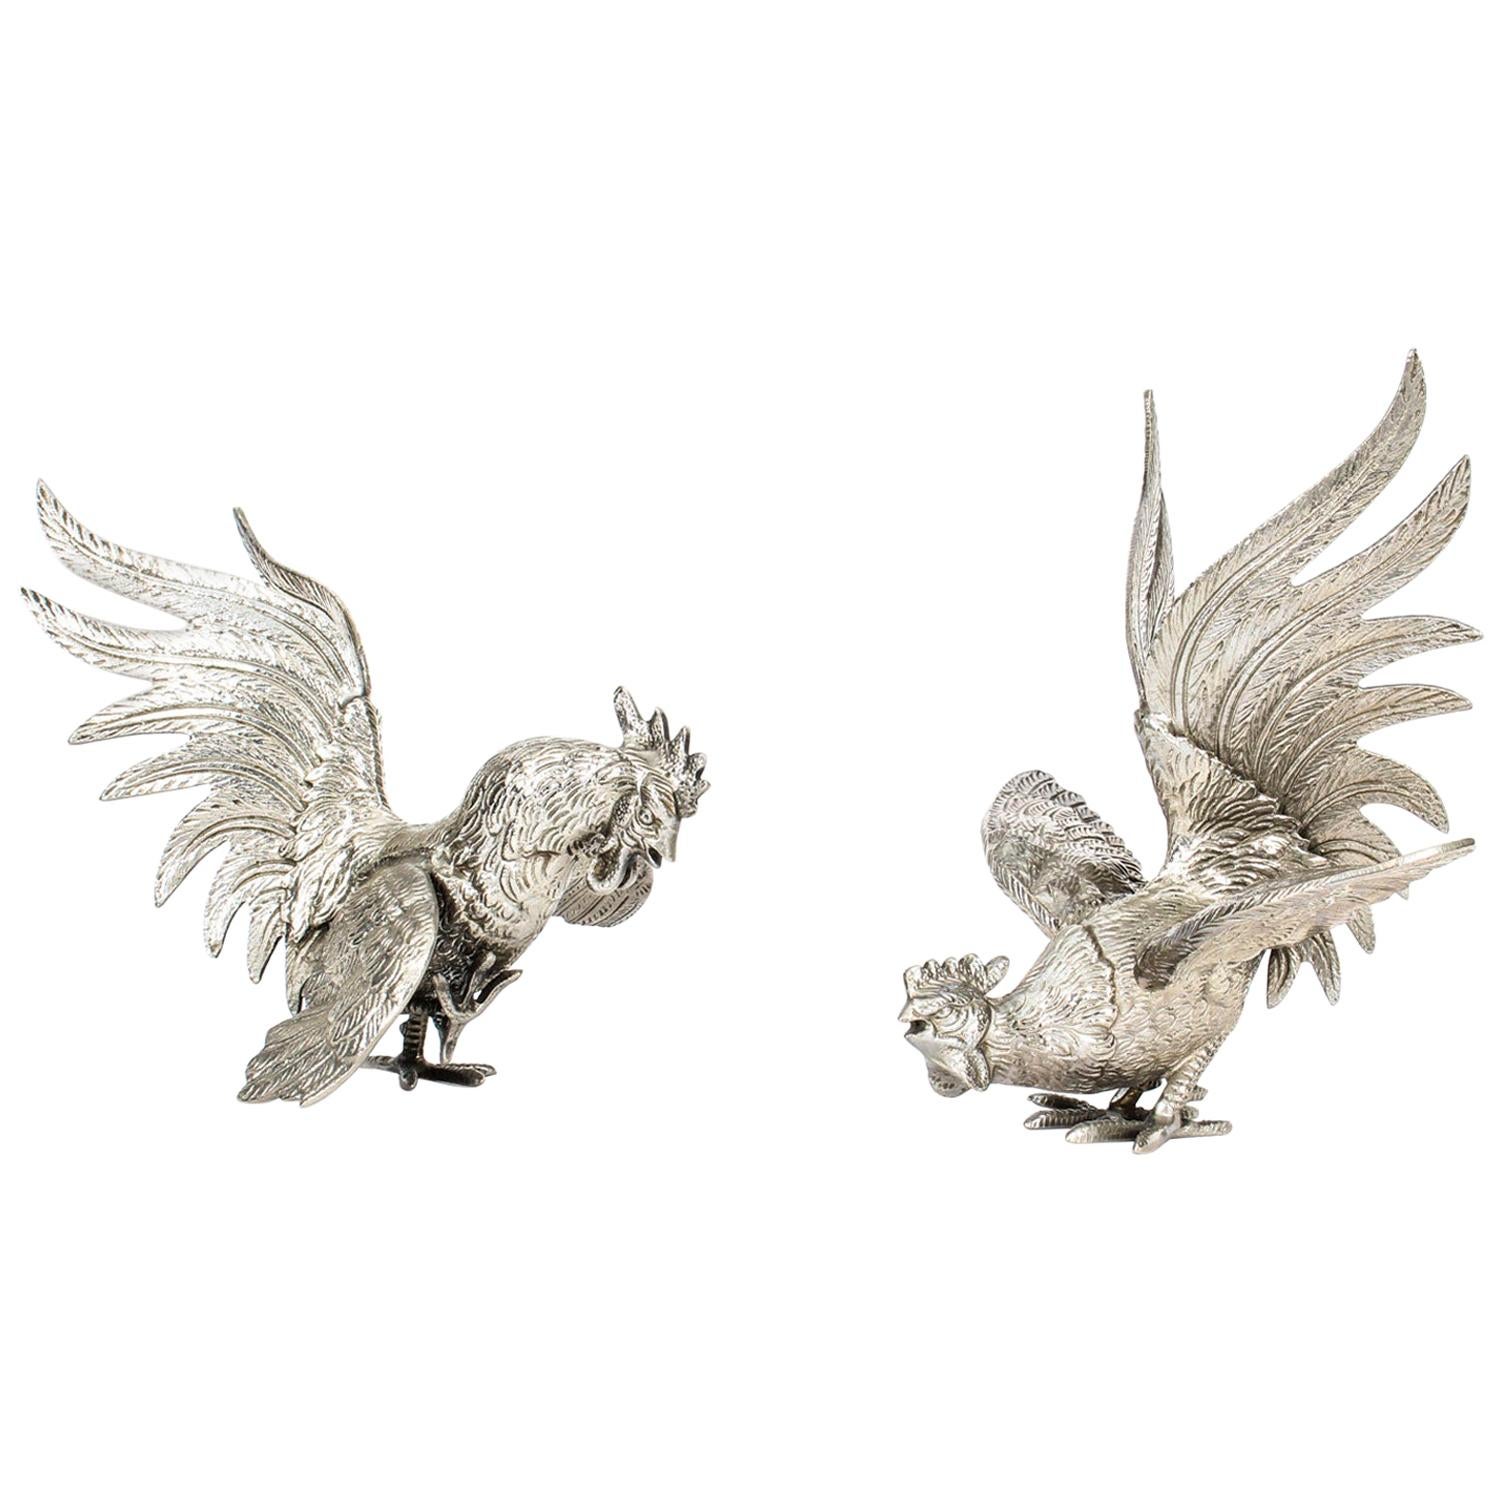 Antique Pair of French Silver Plated Fighting Cockerels, 19th Century